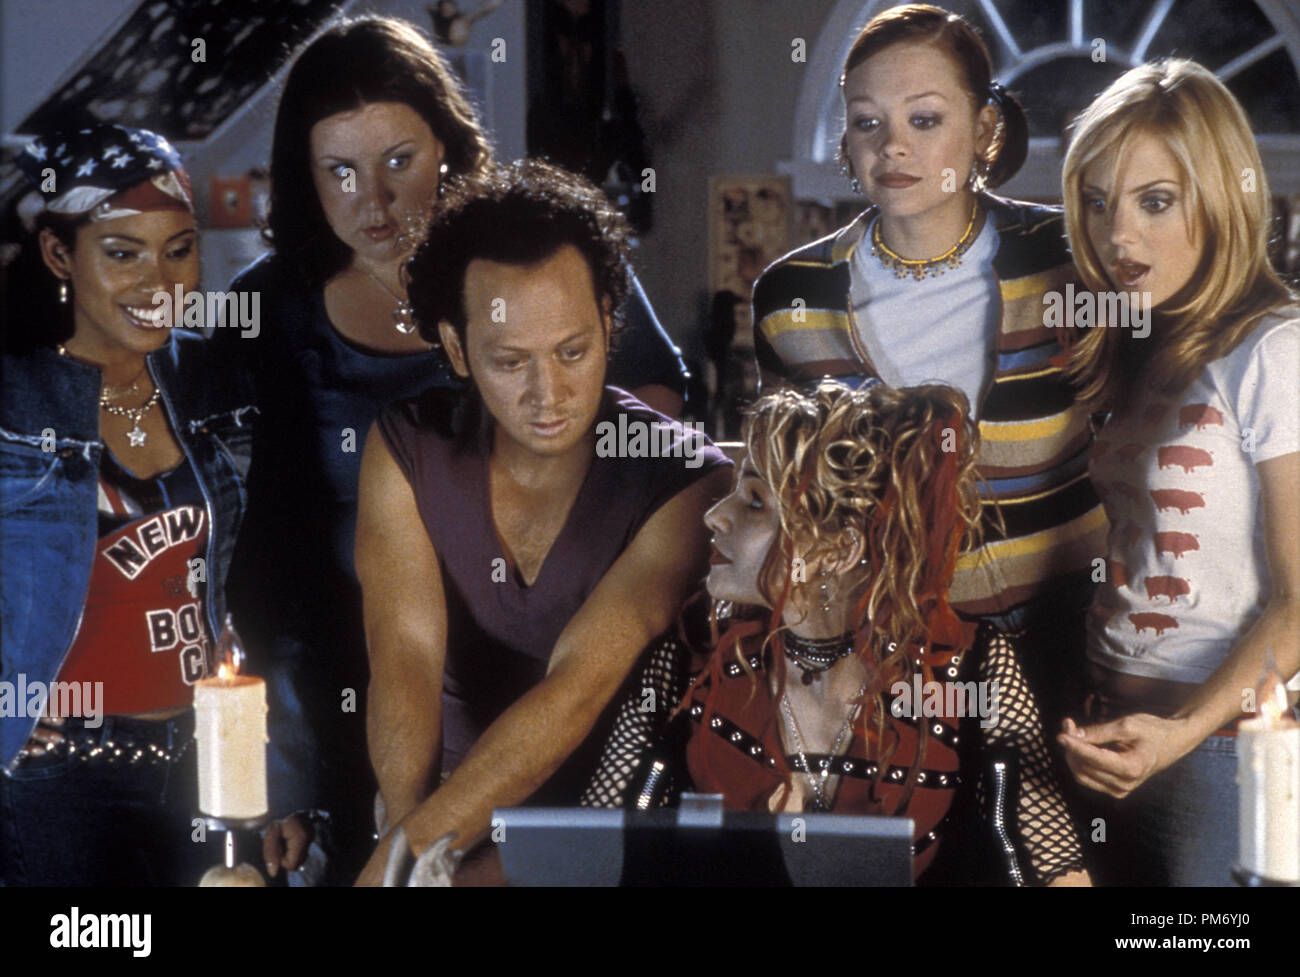 Film Still / Publicity Still from 'The Hot Chick' Maritza Murray, Megan Kuhlmann, Rob Schneider, Alexandra Holden, Sam Doumit, Anna Faris © 2003 Touchstone Photo Credit: Peter Iovino  File Reference # 30753097THA  For Editorial Use Only -  All Rights Reserved Stock Photo